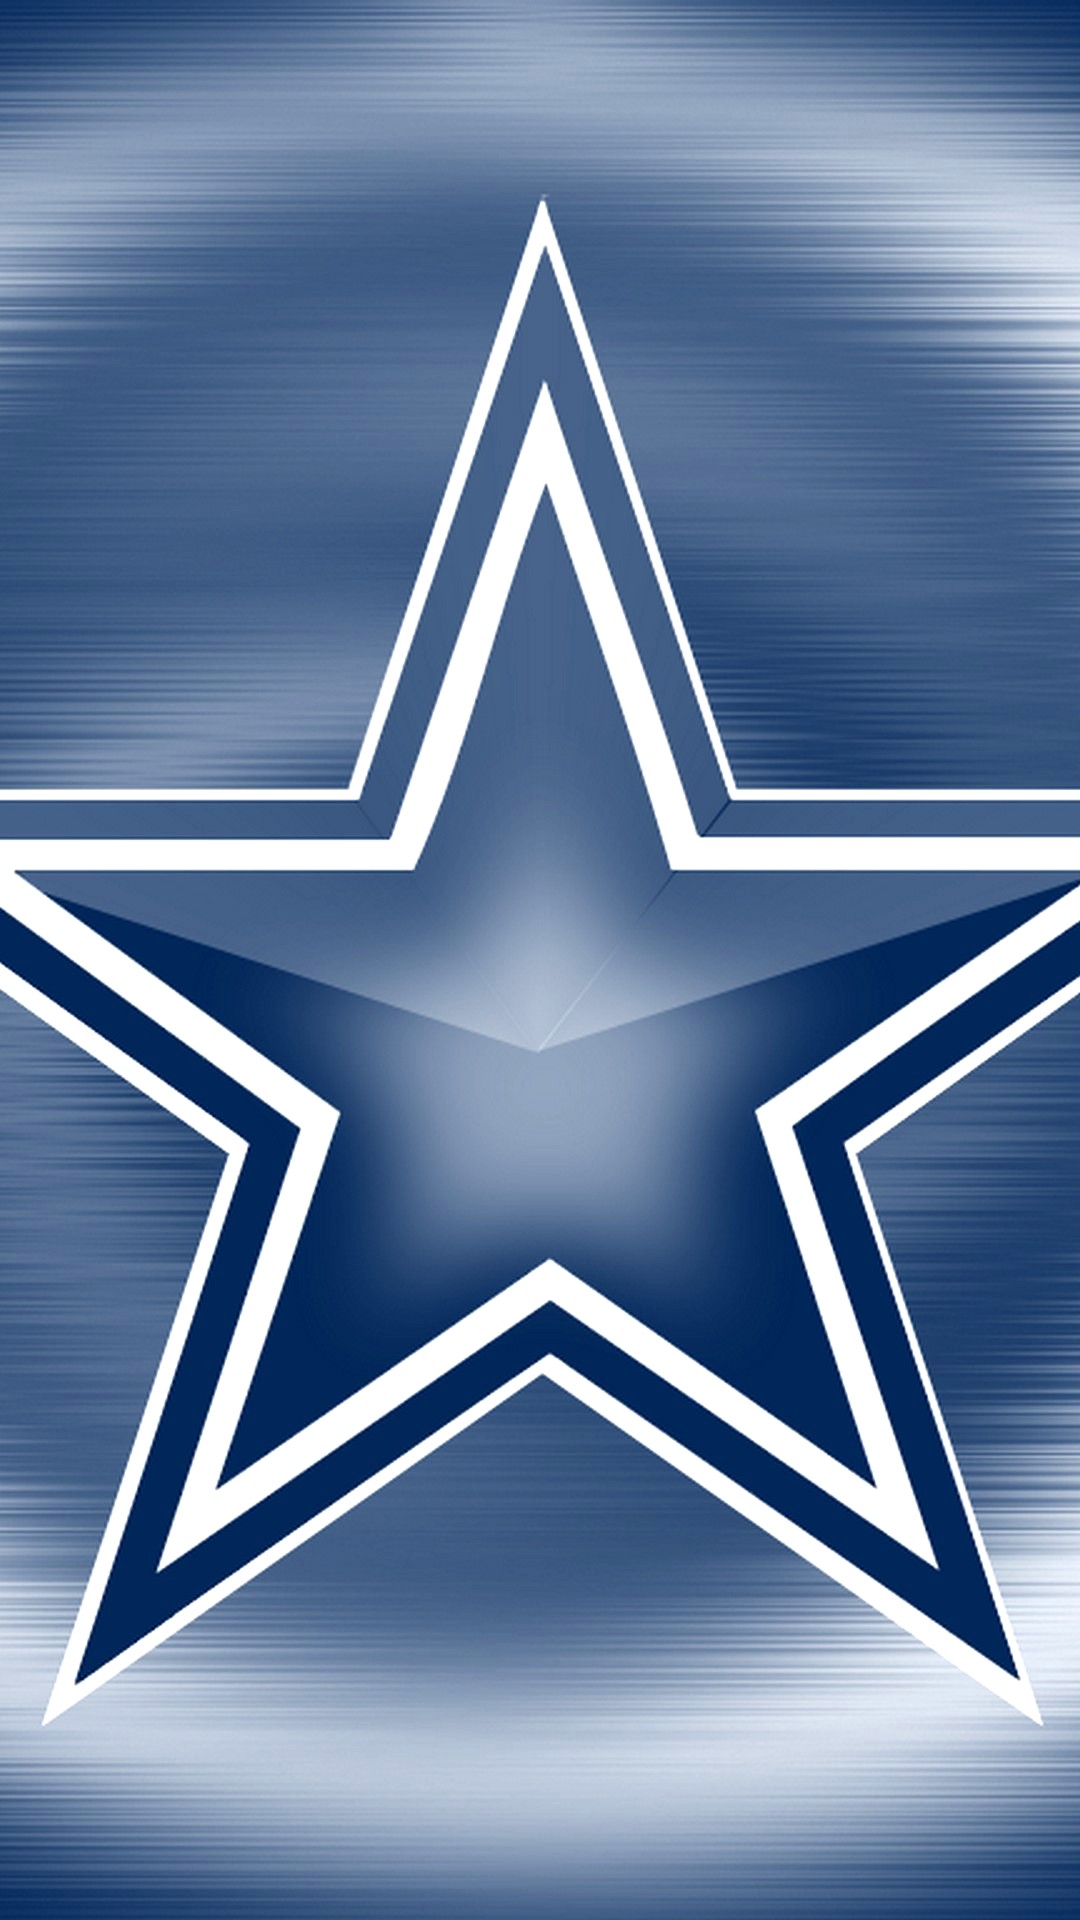 Wallpapers iPhone Cowboys Football With high-resolution 1080X1920 pixel. Donwload and set as wallpaper for your iPhone X, iPhone XS home screen backgrounds, XS Max, XR, iPhone8 lock screen wallpaper, iPhone 7, 6, SE, and other mobile devices